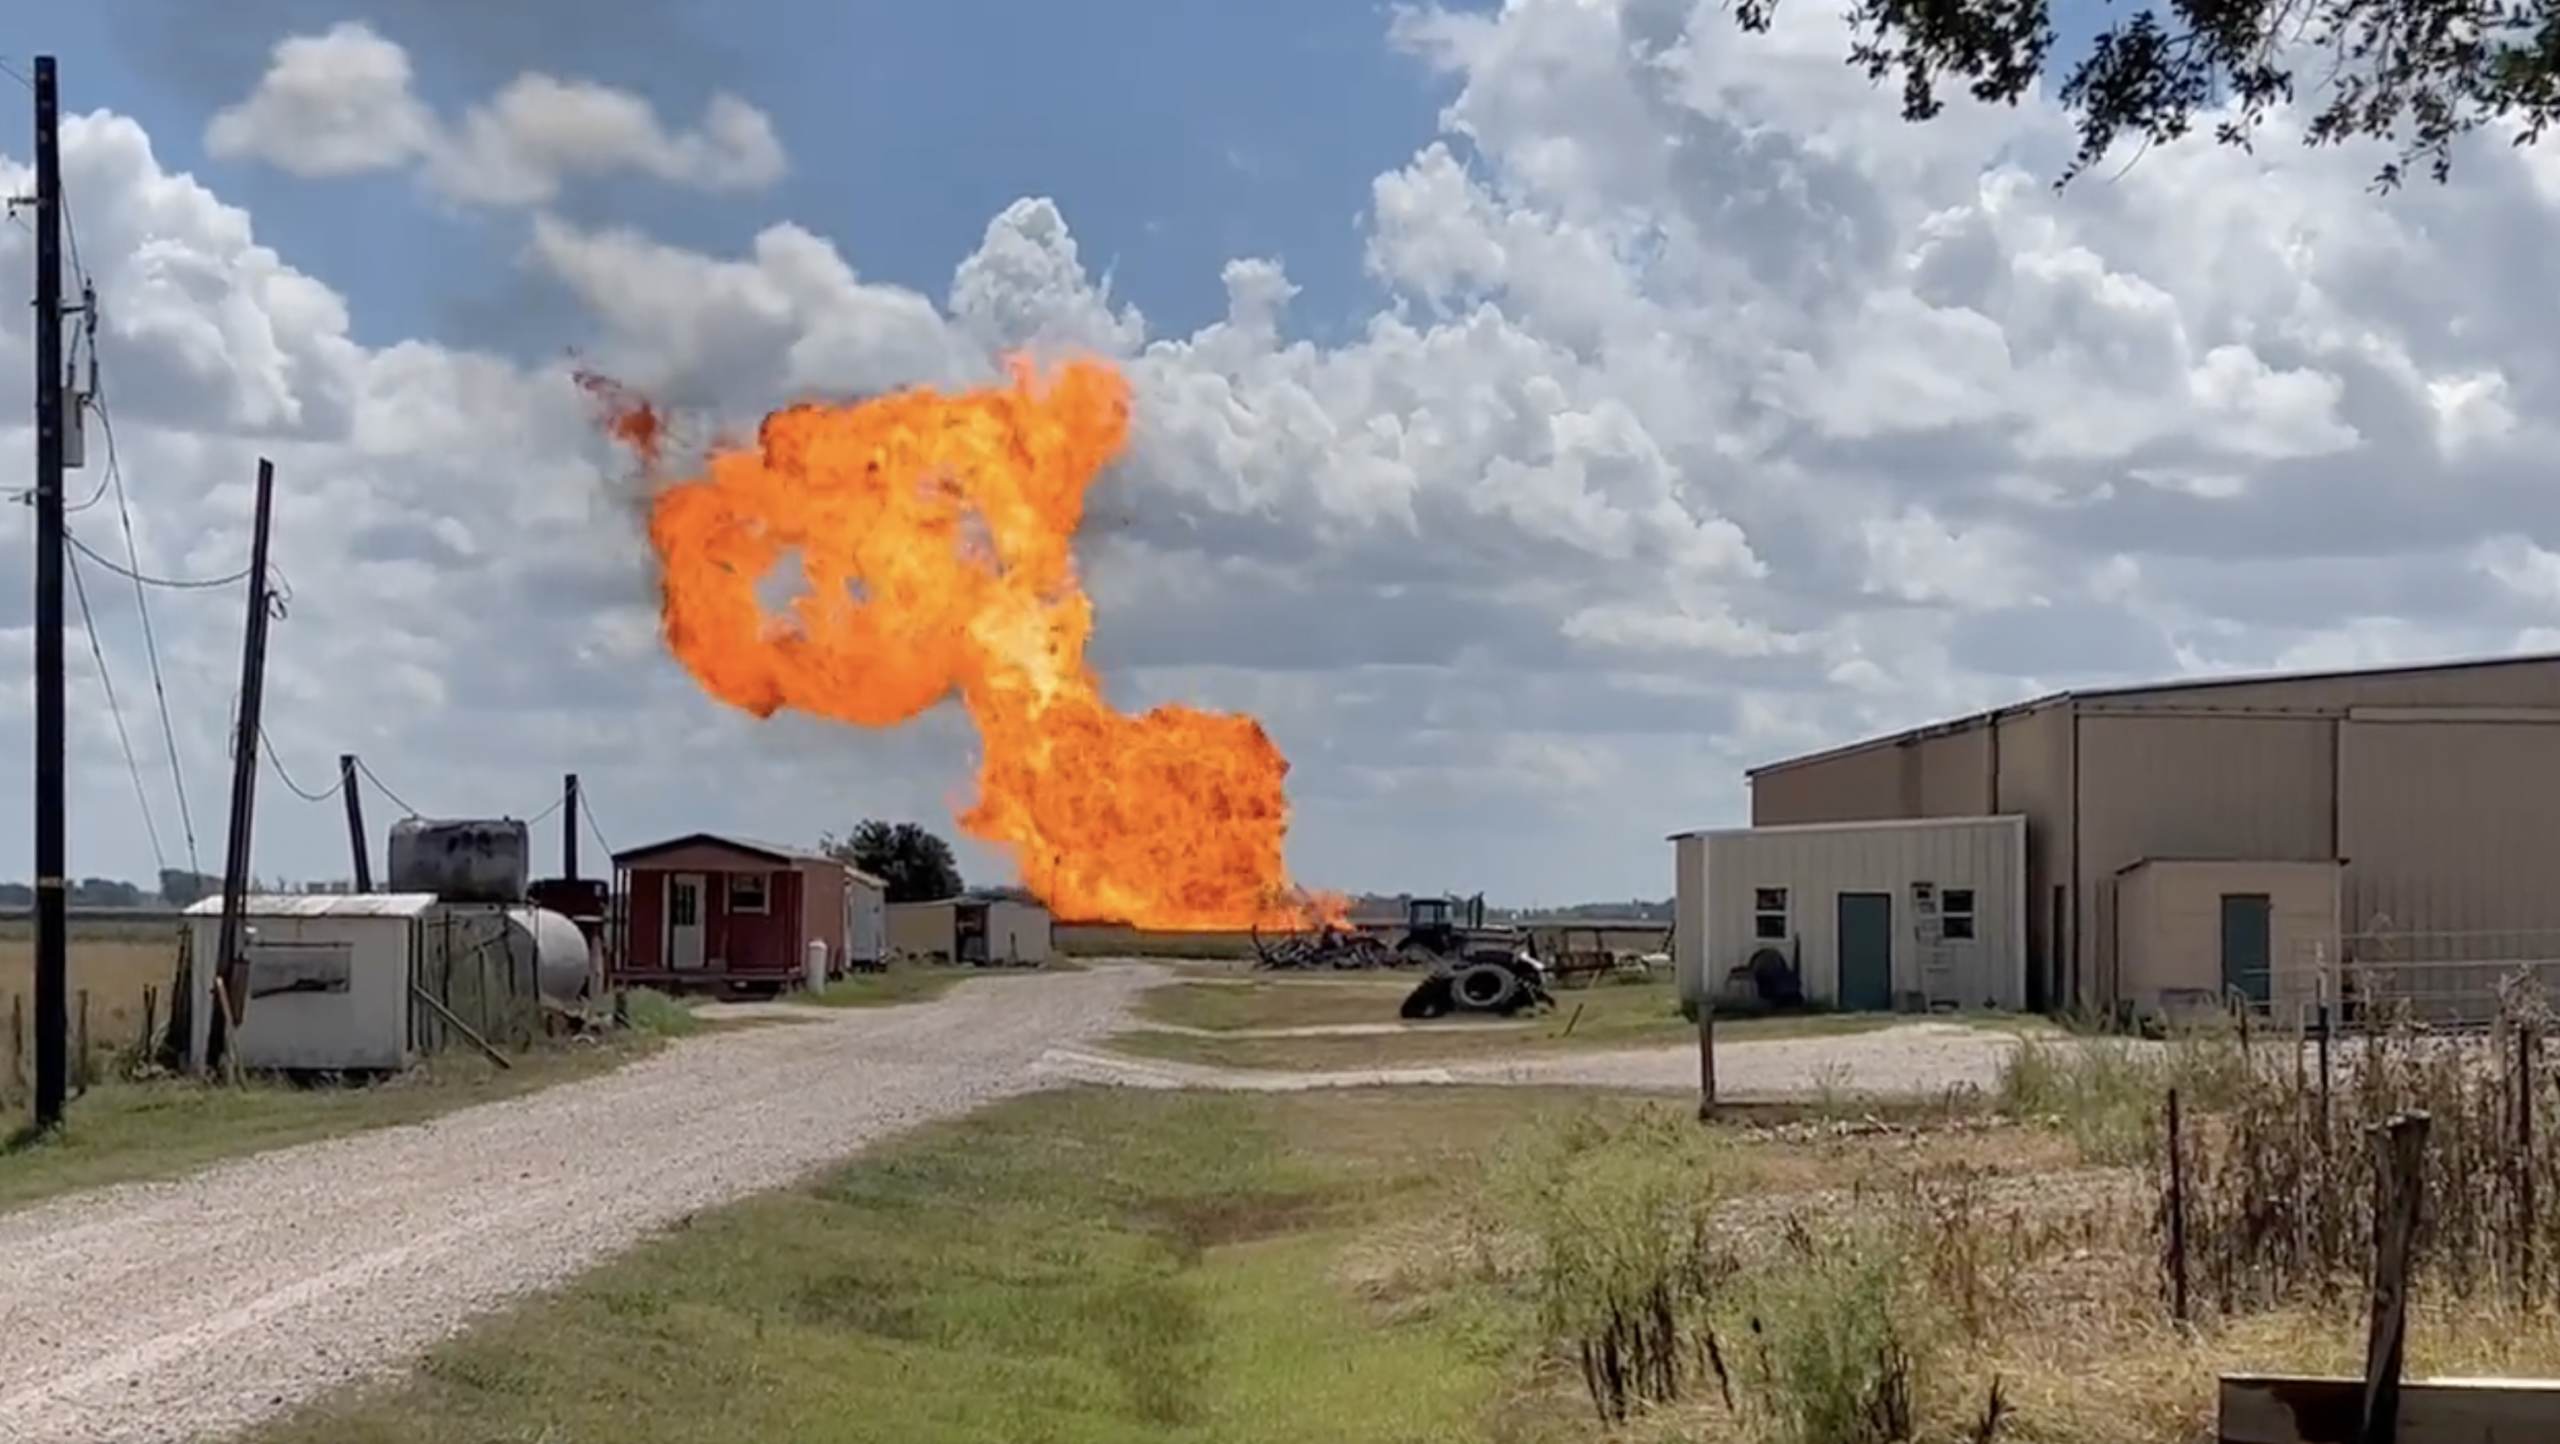 Residents Evacuated After Explosion on Natural Gas Pipeline in Wallis, Texas